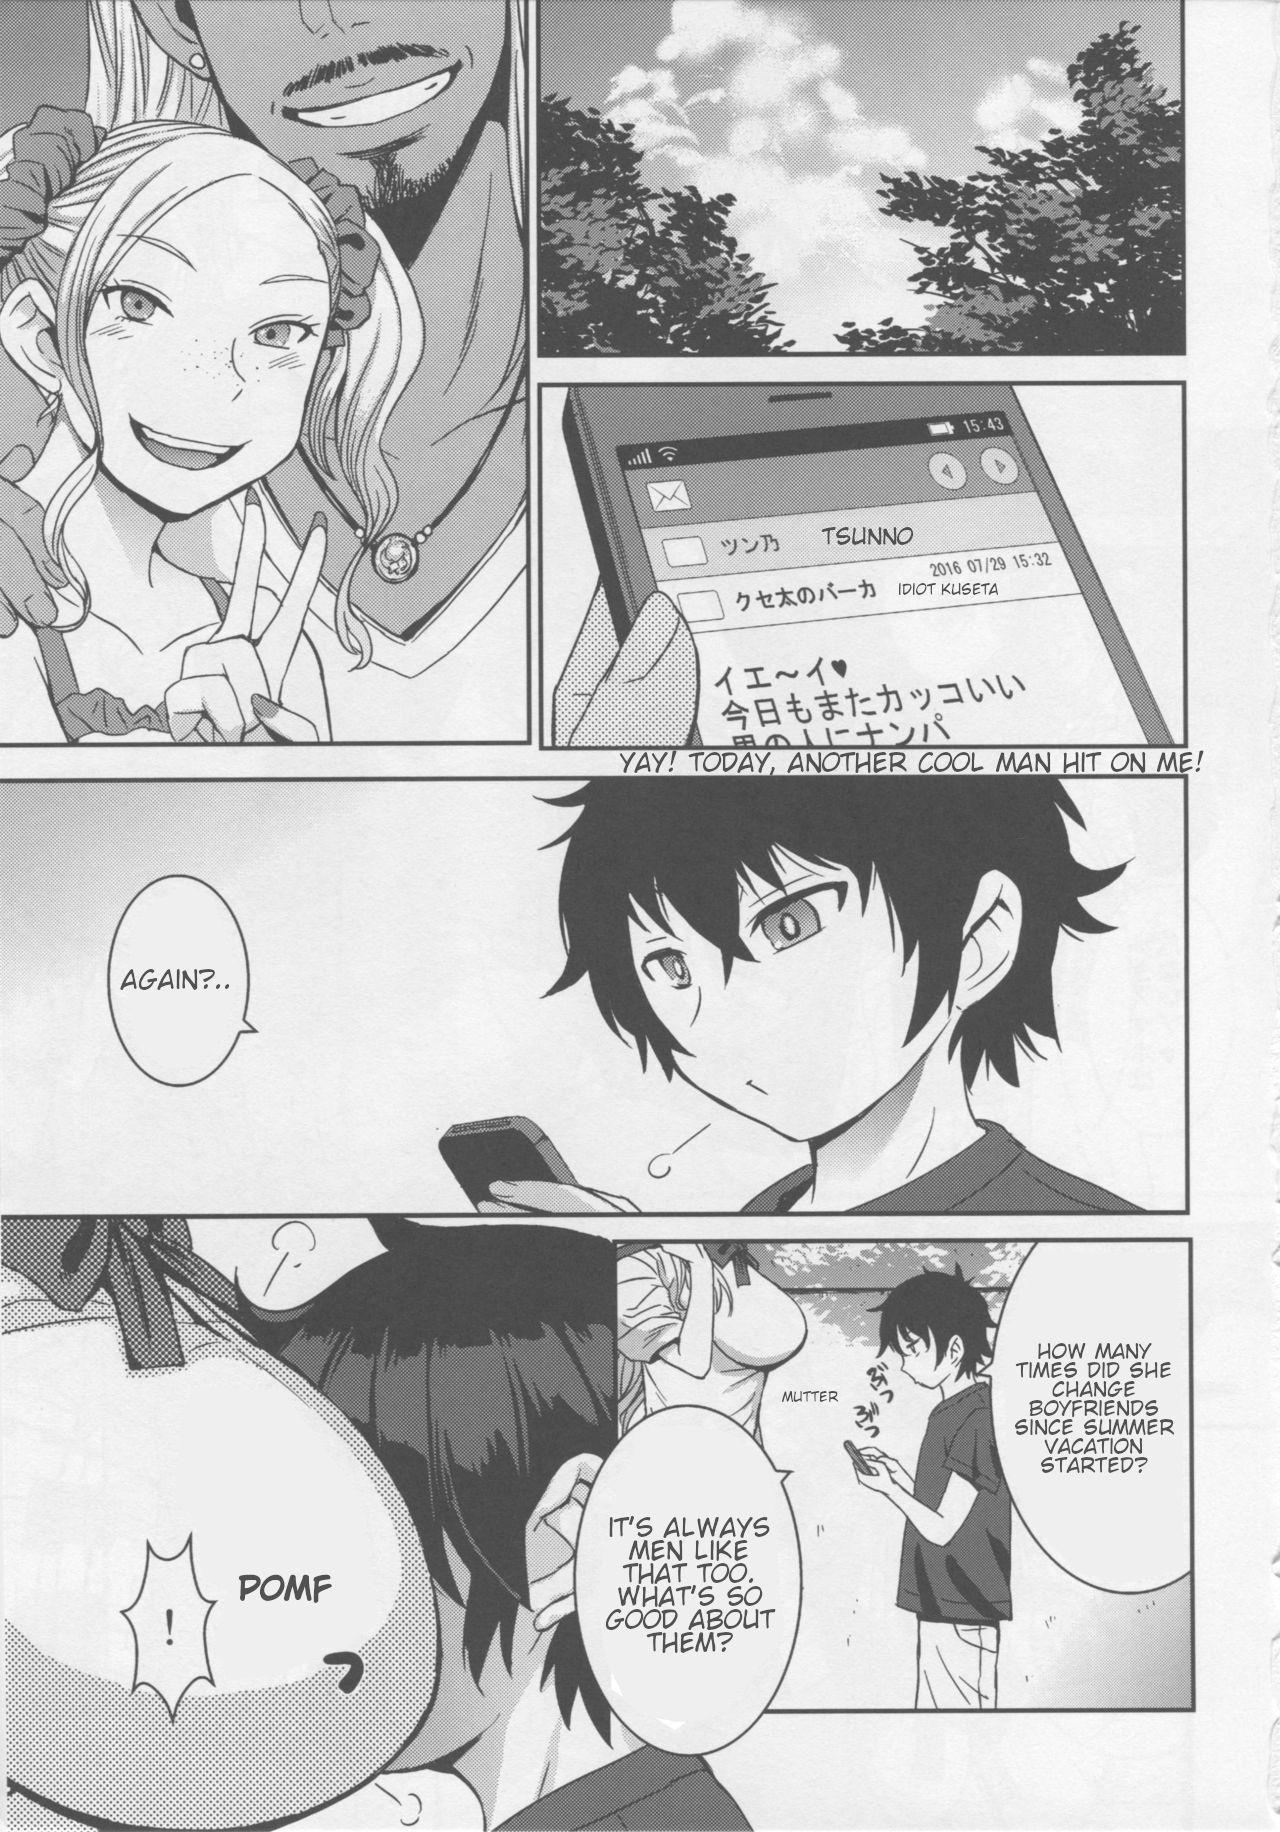 Wife Boy Meets Gal - Oshiete galko chan Sharing - Page 2